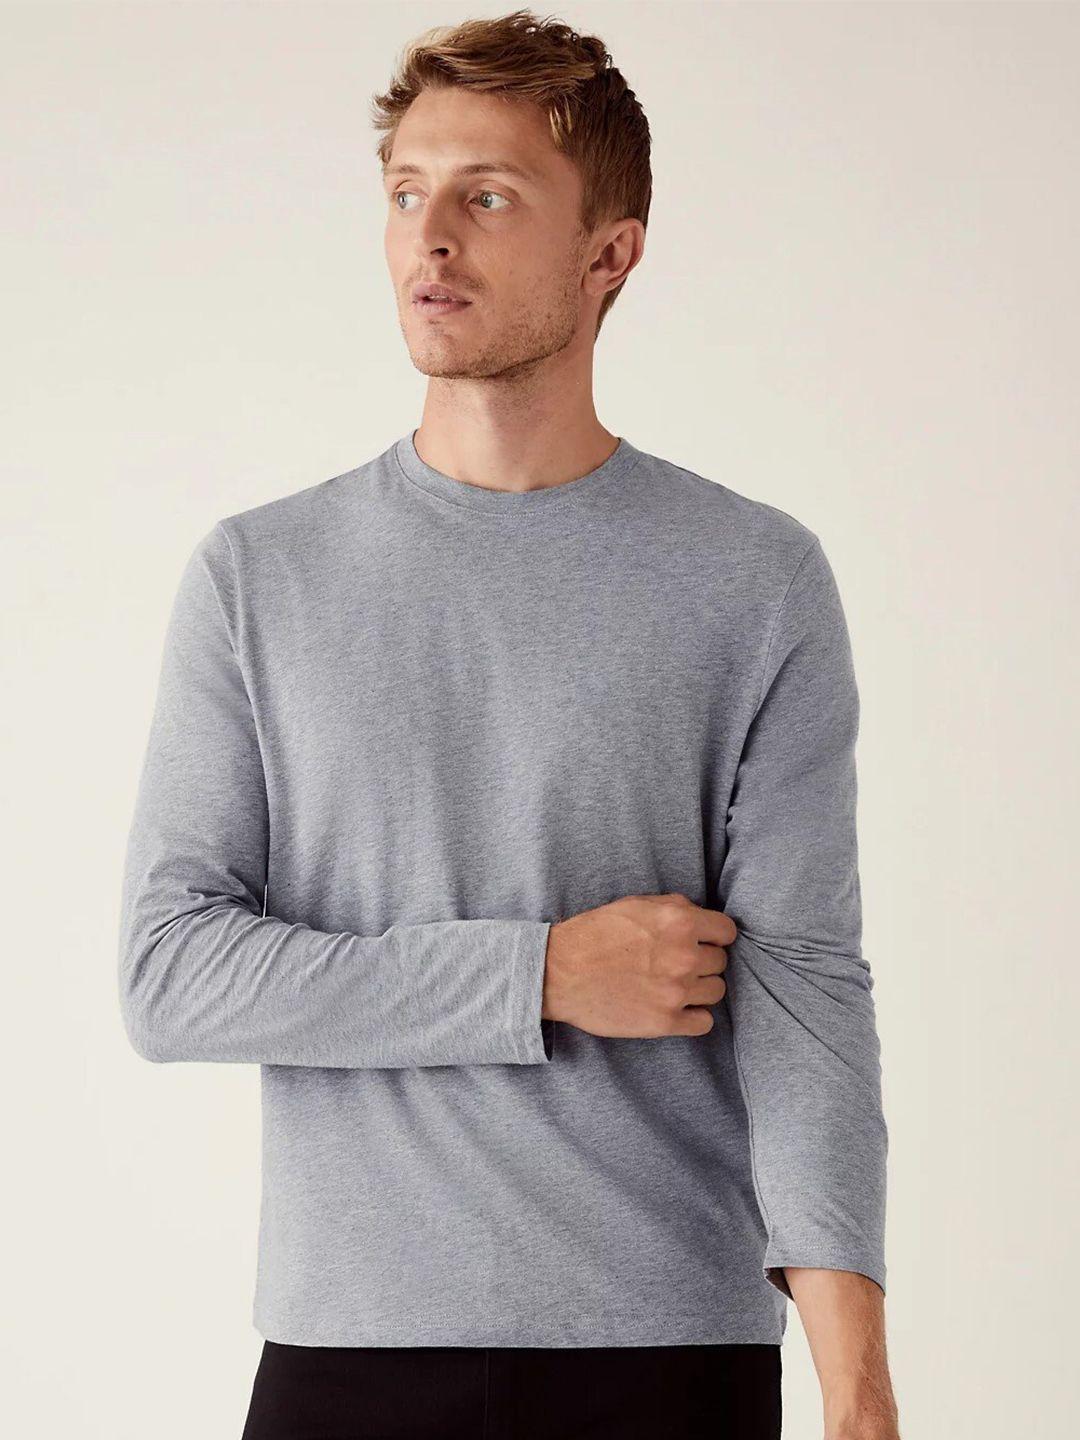 marks & spencer men long sleeves pure cotton t-shirt